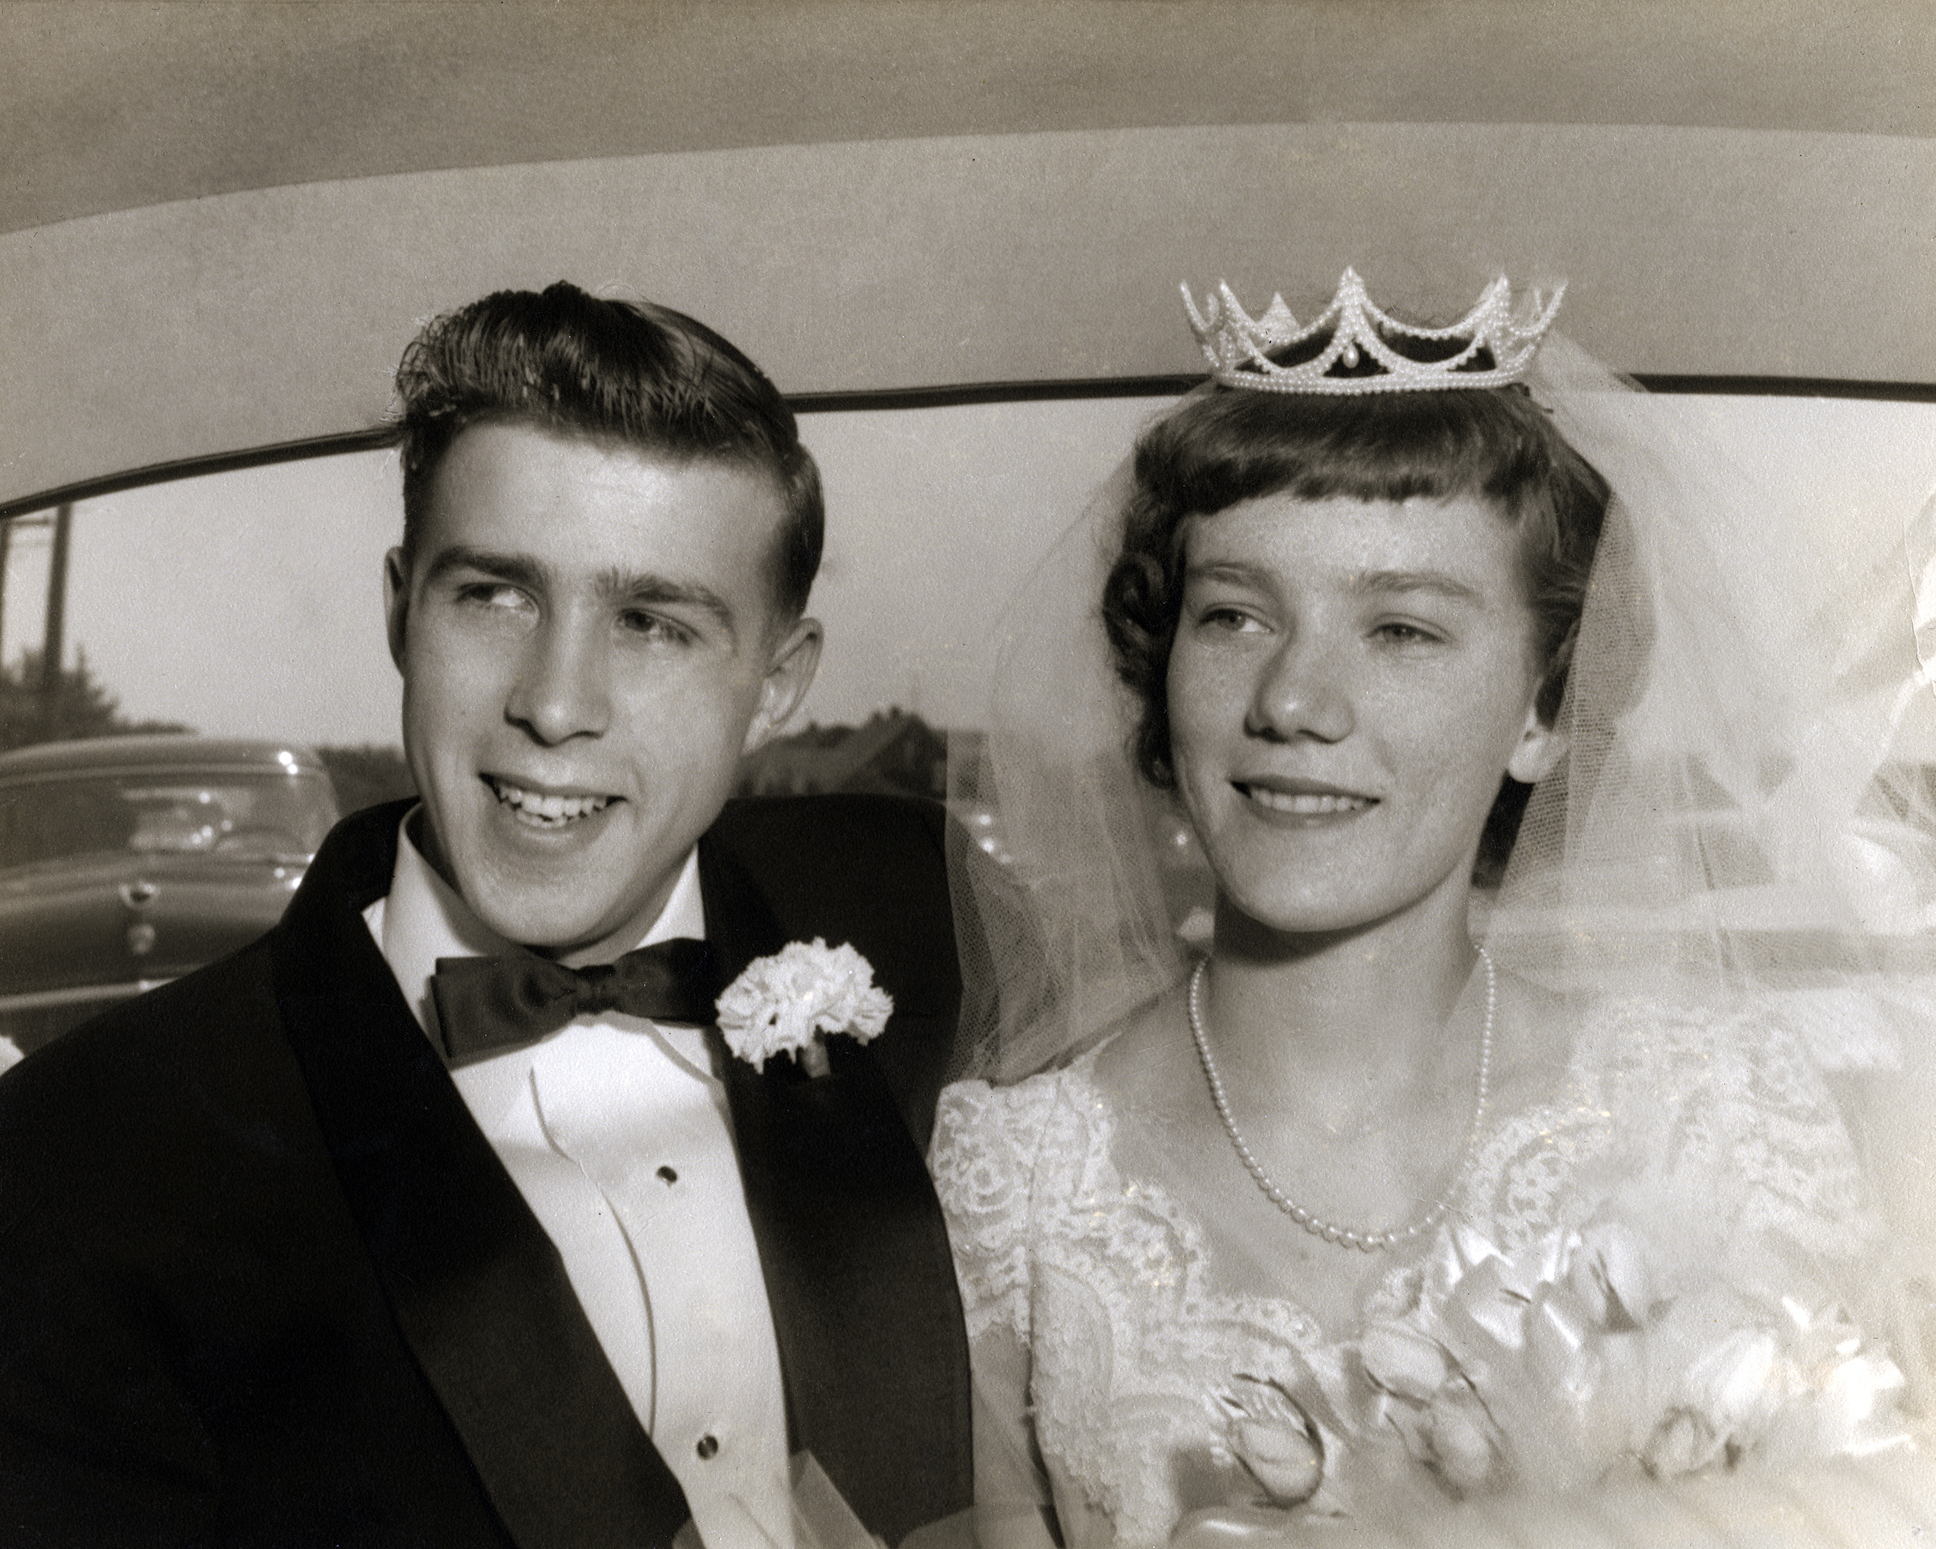 A young couple, man in a black tuxedo with a bow tie and boutonniere, woman in a wedding dress with a delicate tiara, sitting together in a car on their wedding day